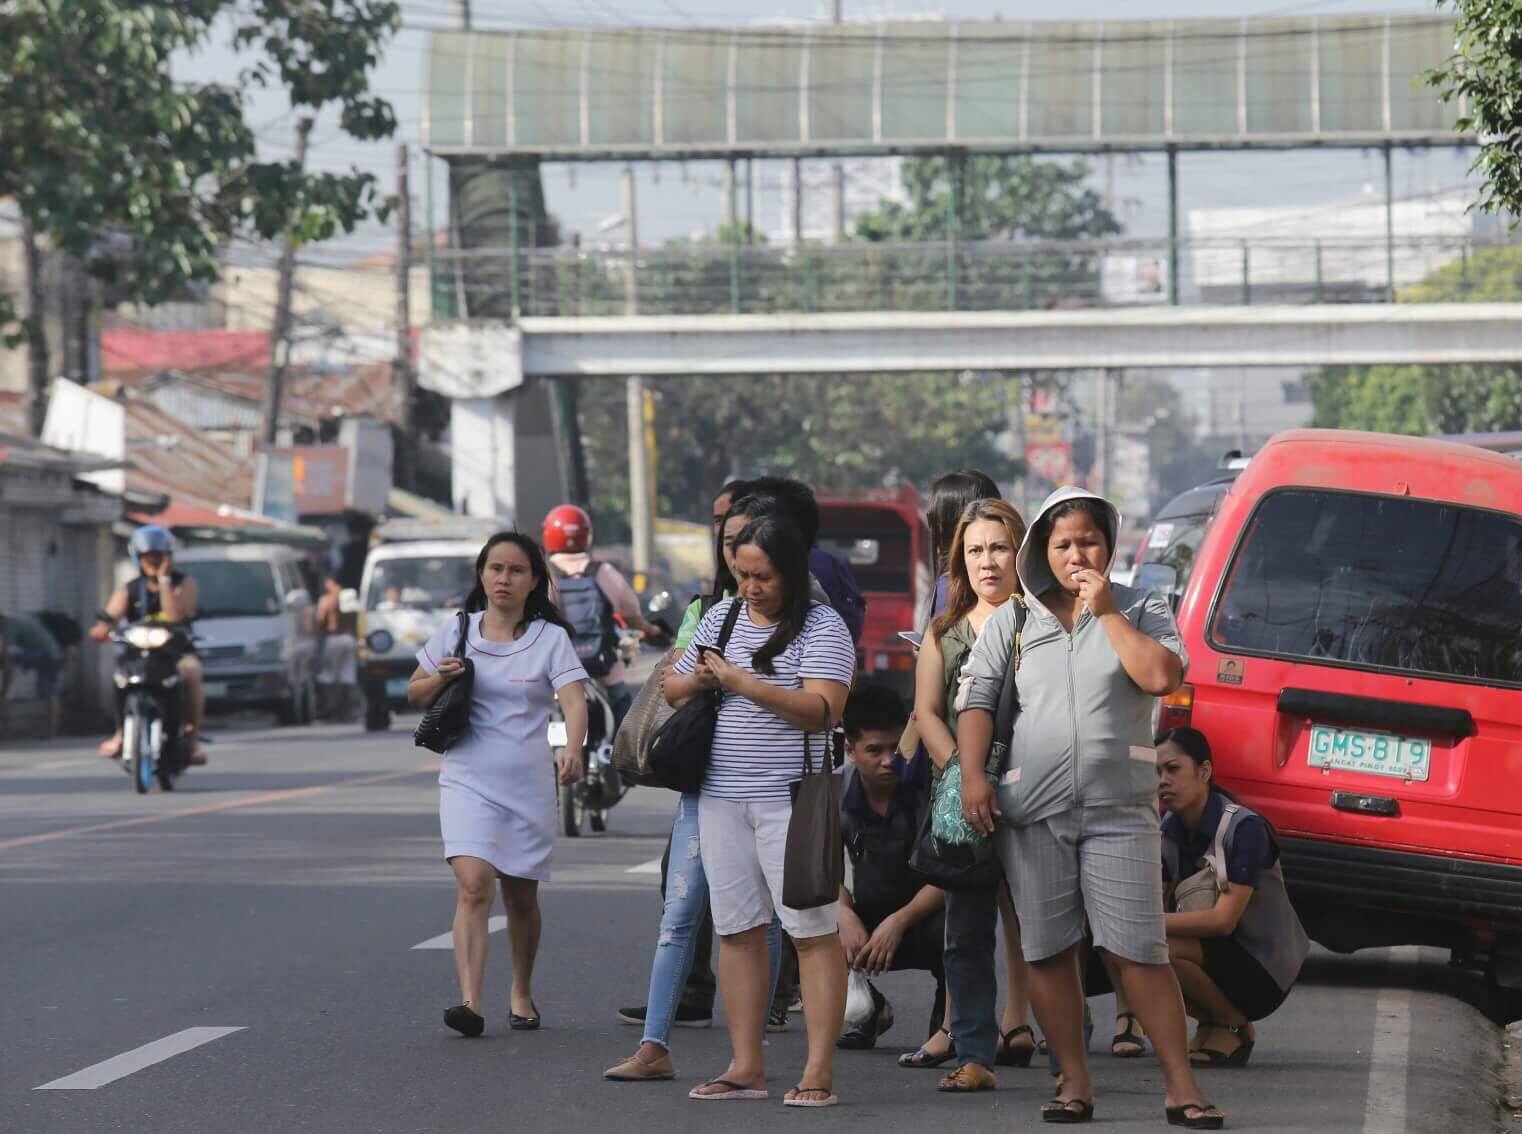 As of 8:30 a.m., more passengers wait for passenger jeepneys along the road in Barangay Bulacao, Cebu City as transport groups hold nationwide transport strike. (CDN PHOTO/JUNJIE MENDOZA)